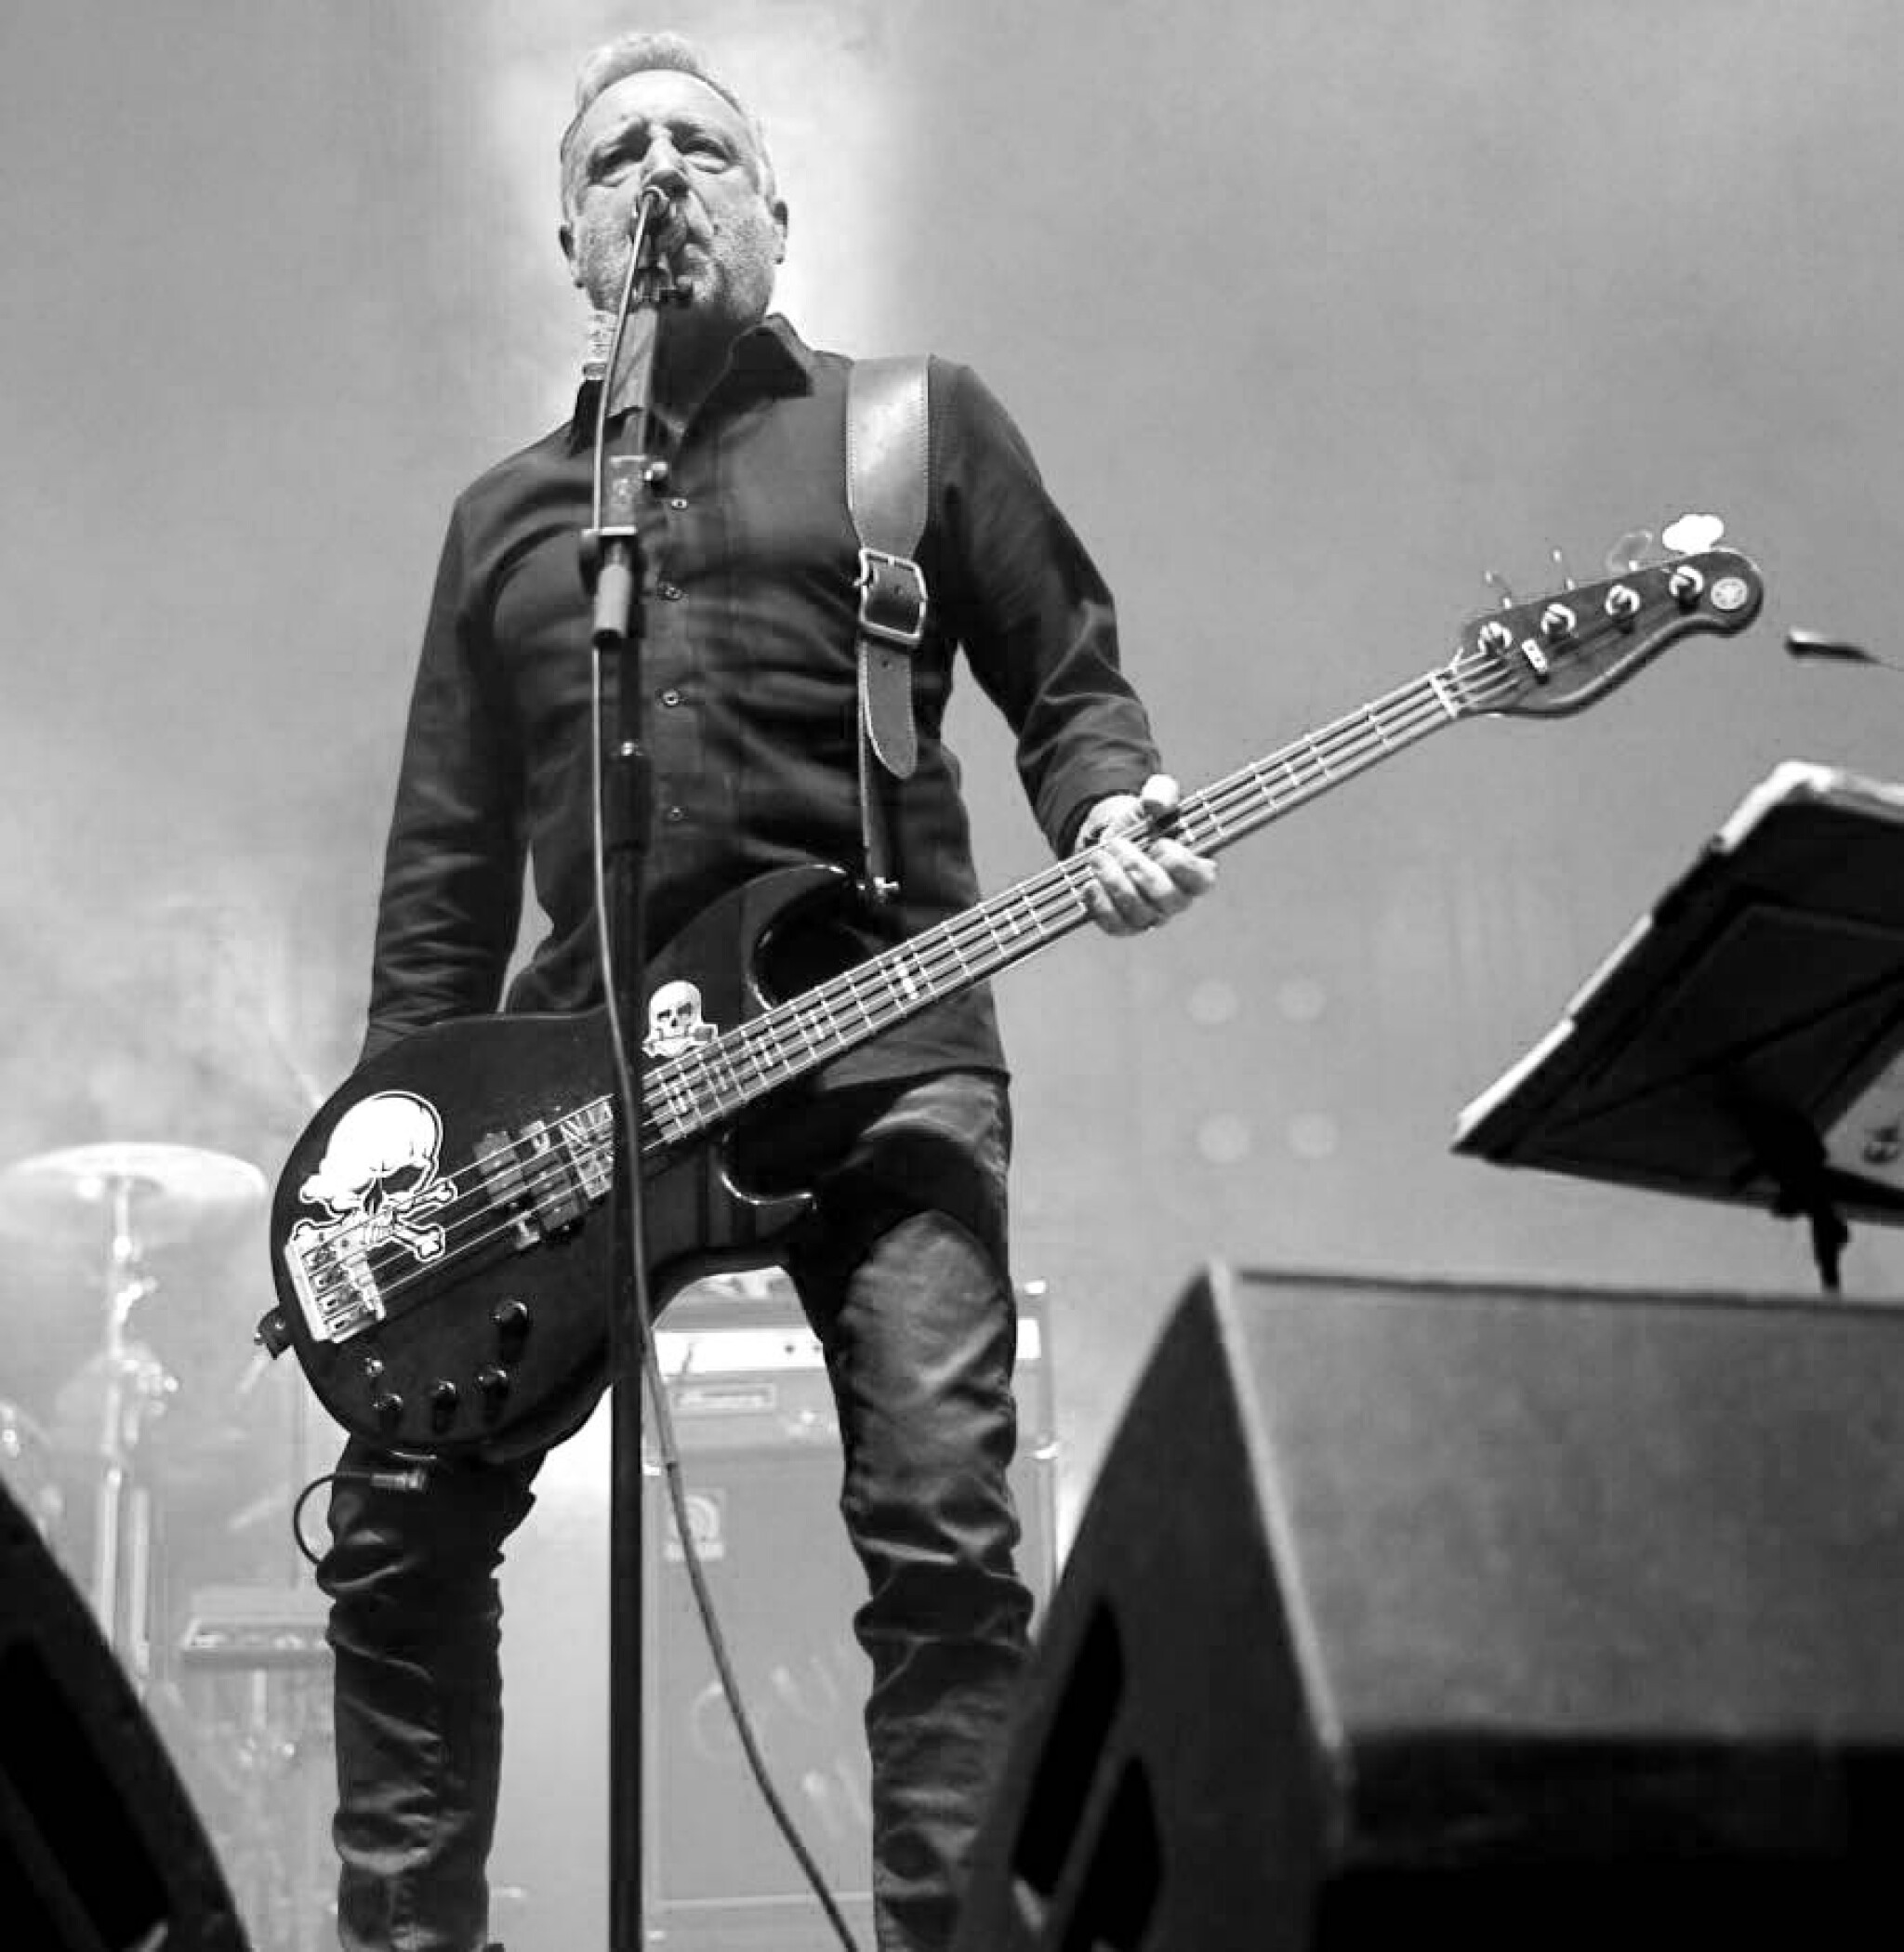 Peter Hook with black GS78 guitar strap 7-4-23 mono 2.jpg